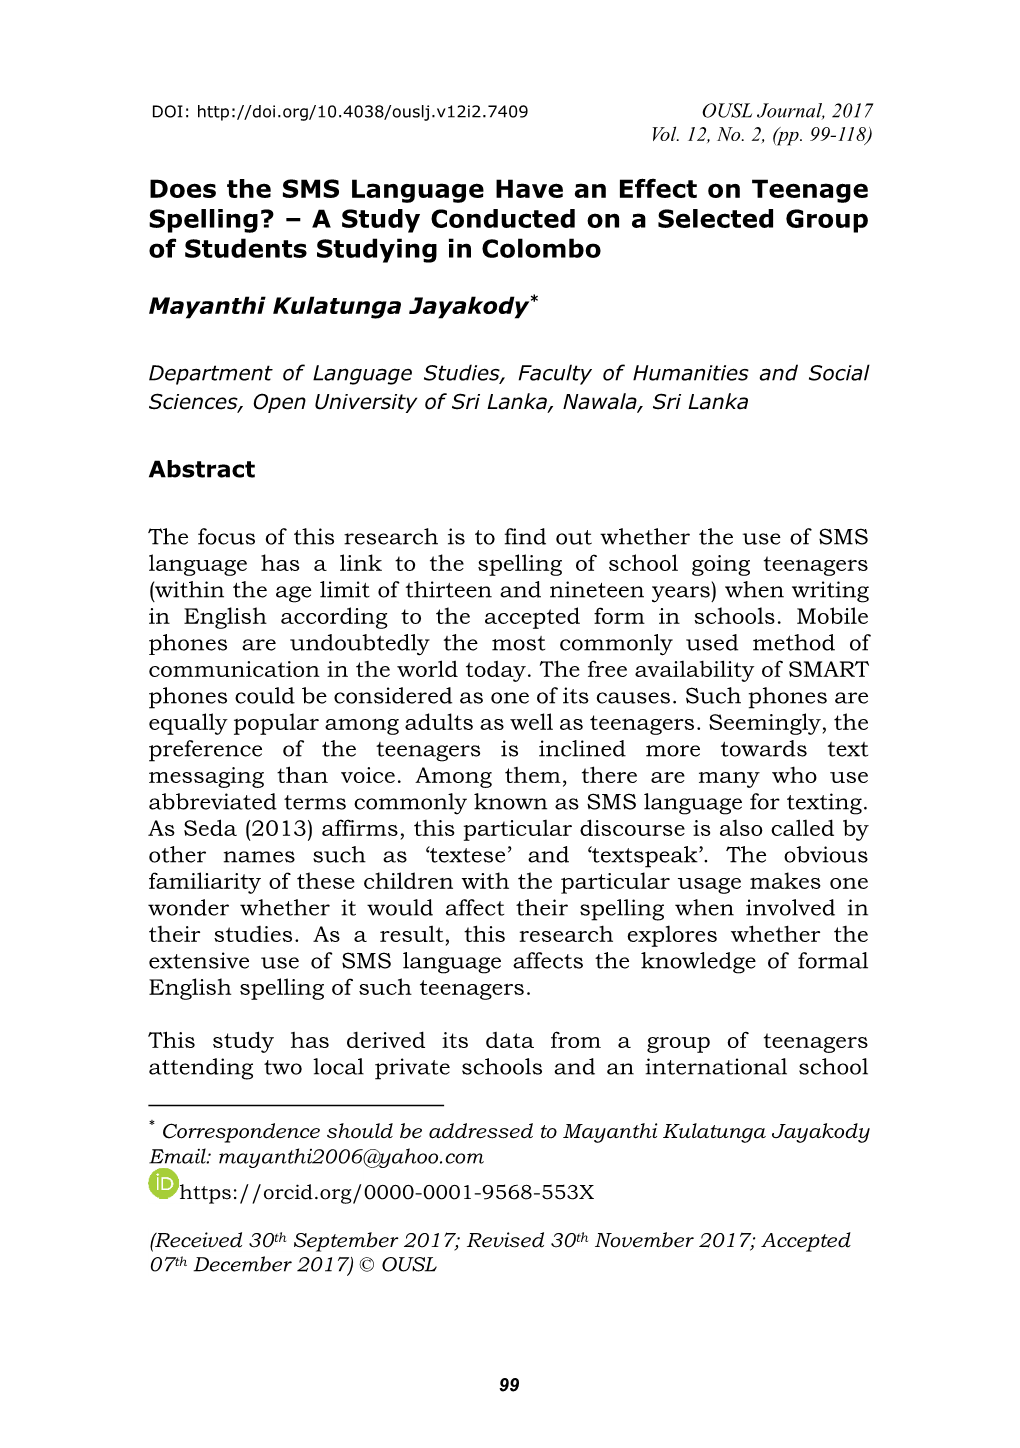 Does the SMS Language Have an Effect on Teenage Spelling? – a Study Conducted on a Selected Group of Students Studying in Colombo